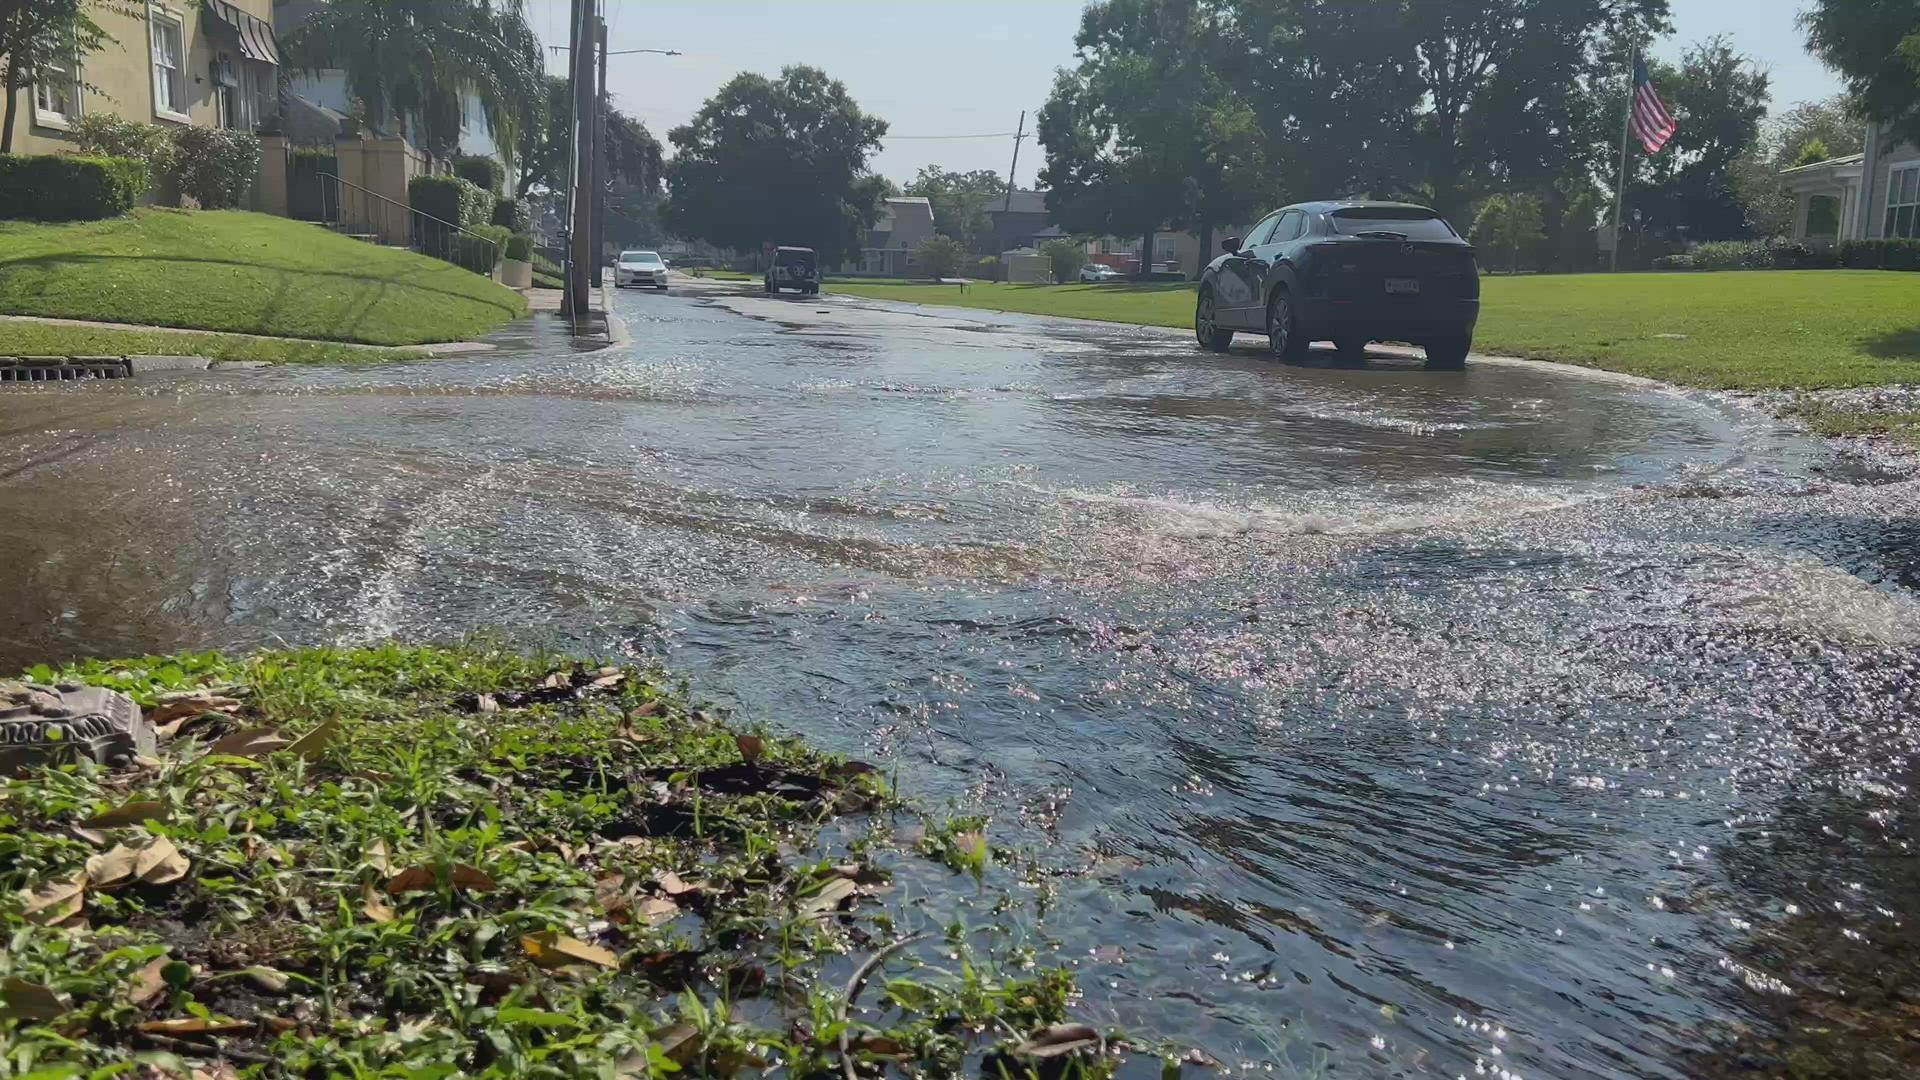 Director of Engineering Chris Humphries said he directed his team on Wednesday morning to close valves that were letting in extra water from Lake Pontchartrain.